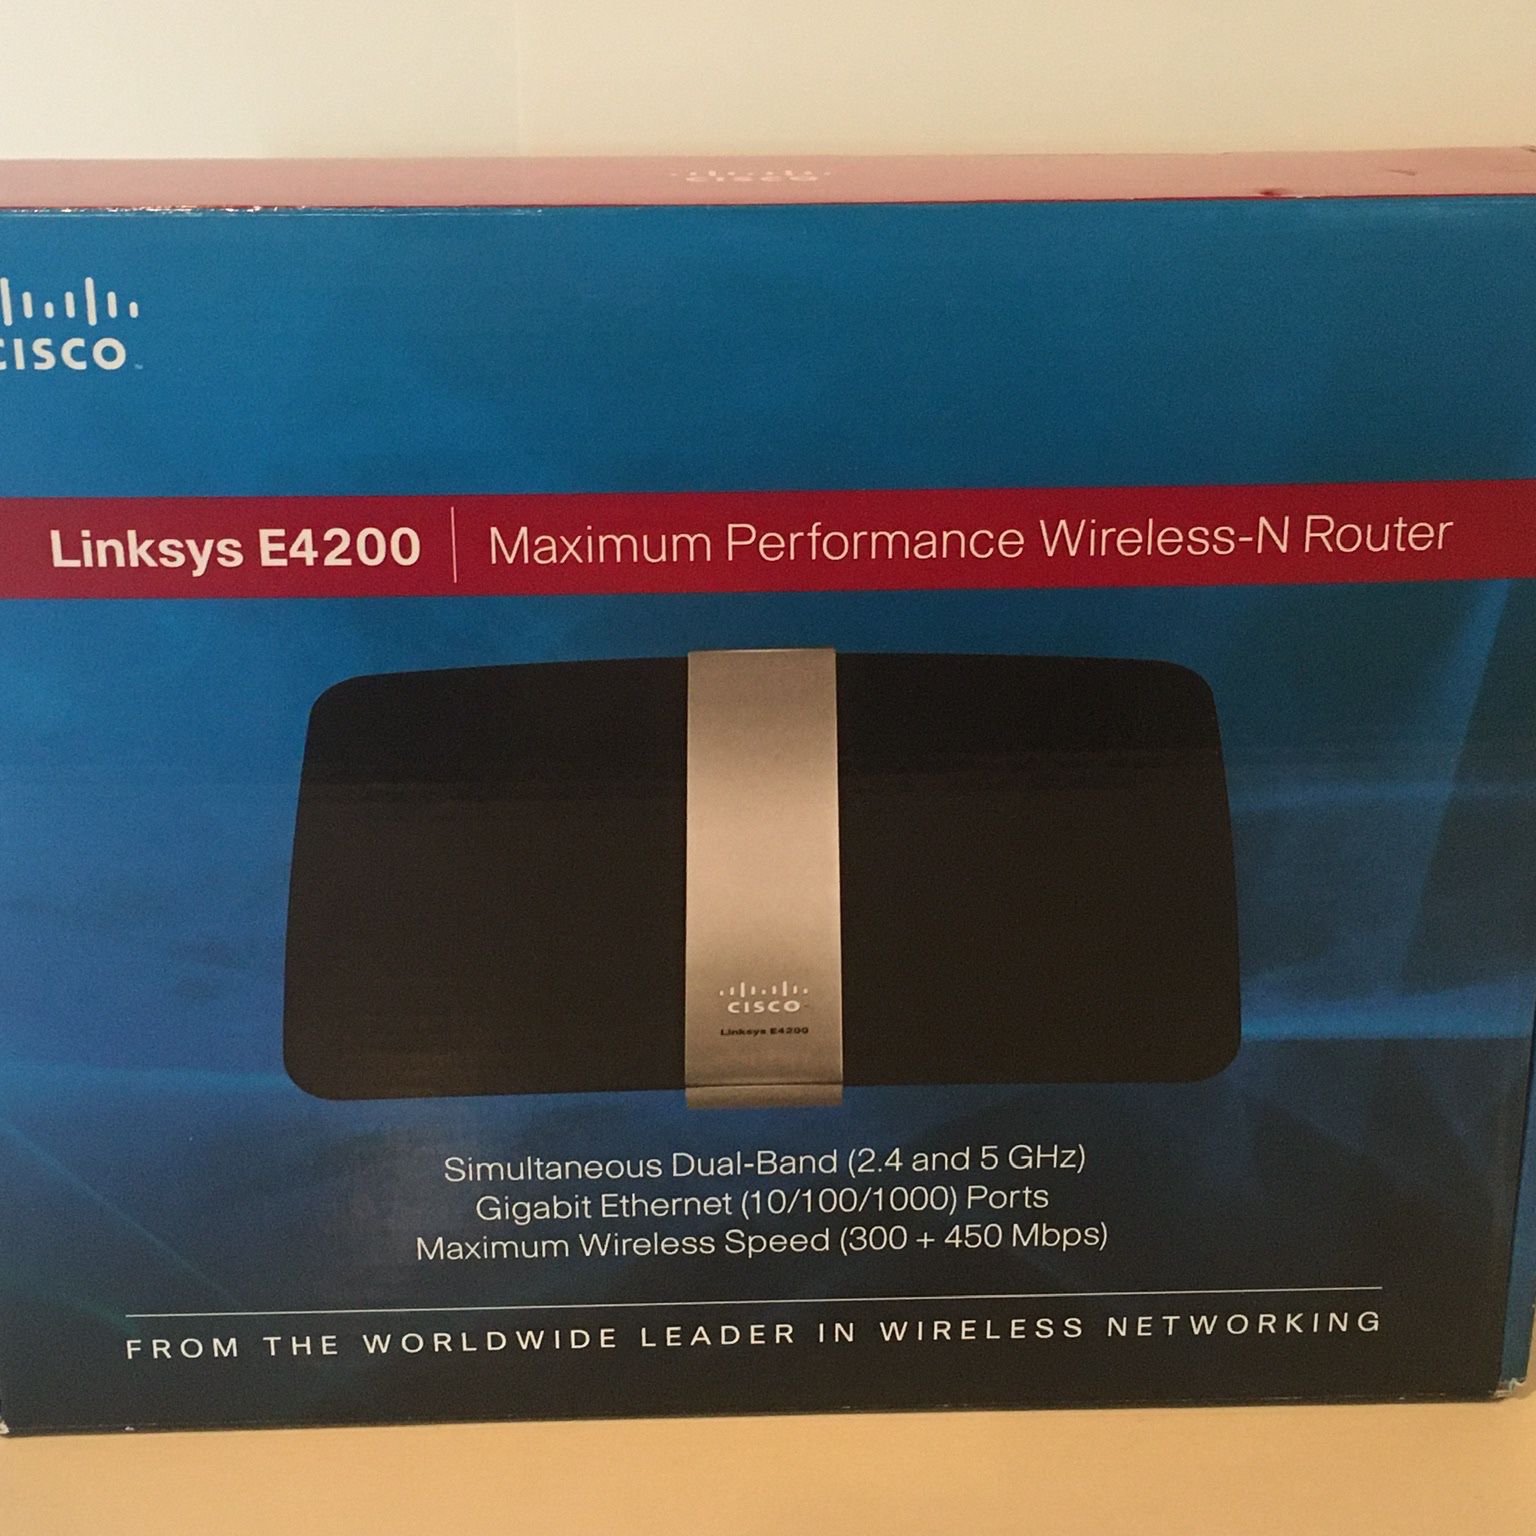 Cisco Linksys E4200 Wireless Router with Firewall